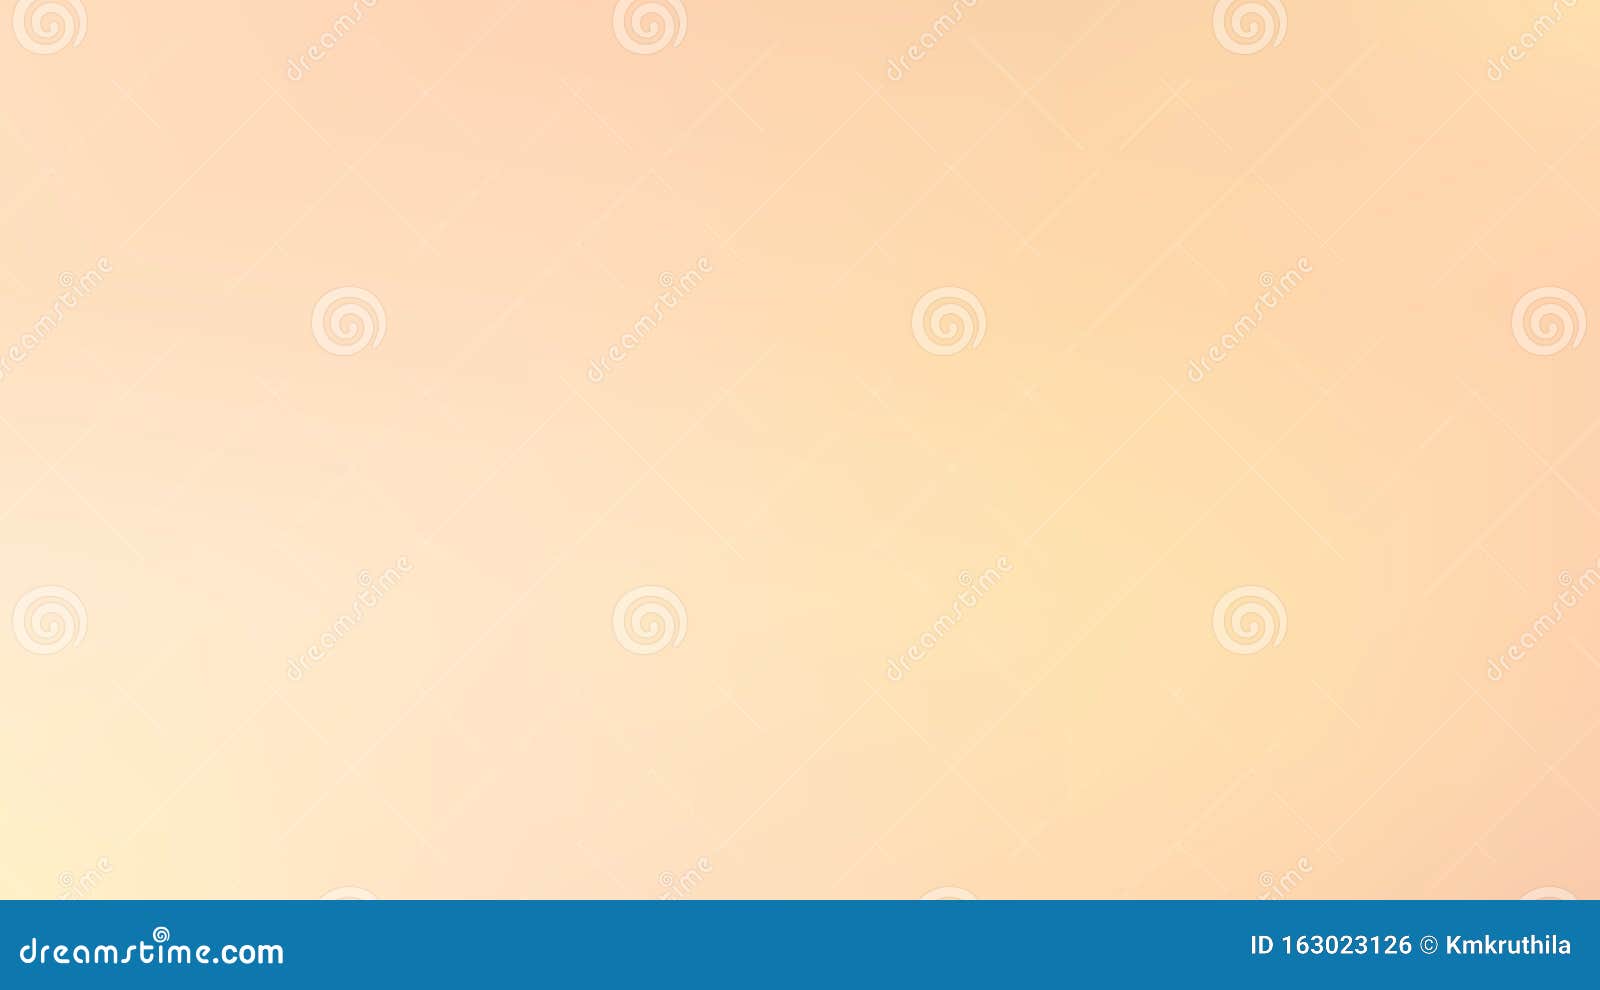 Light Color Simple Background Stock Vector - Illustration of simple,  presentation: 163023126